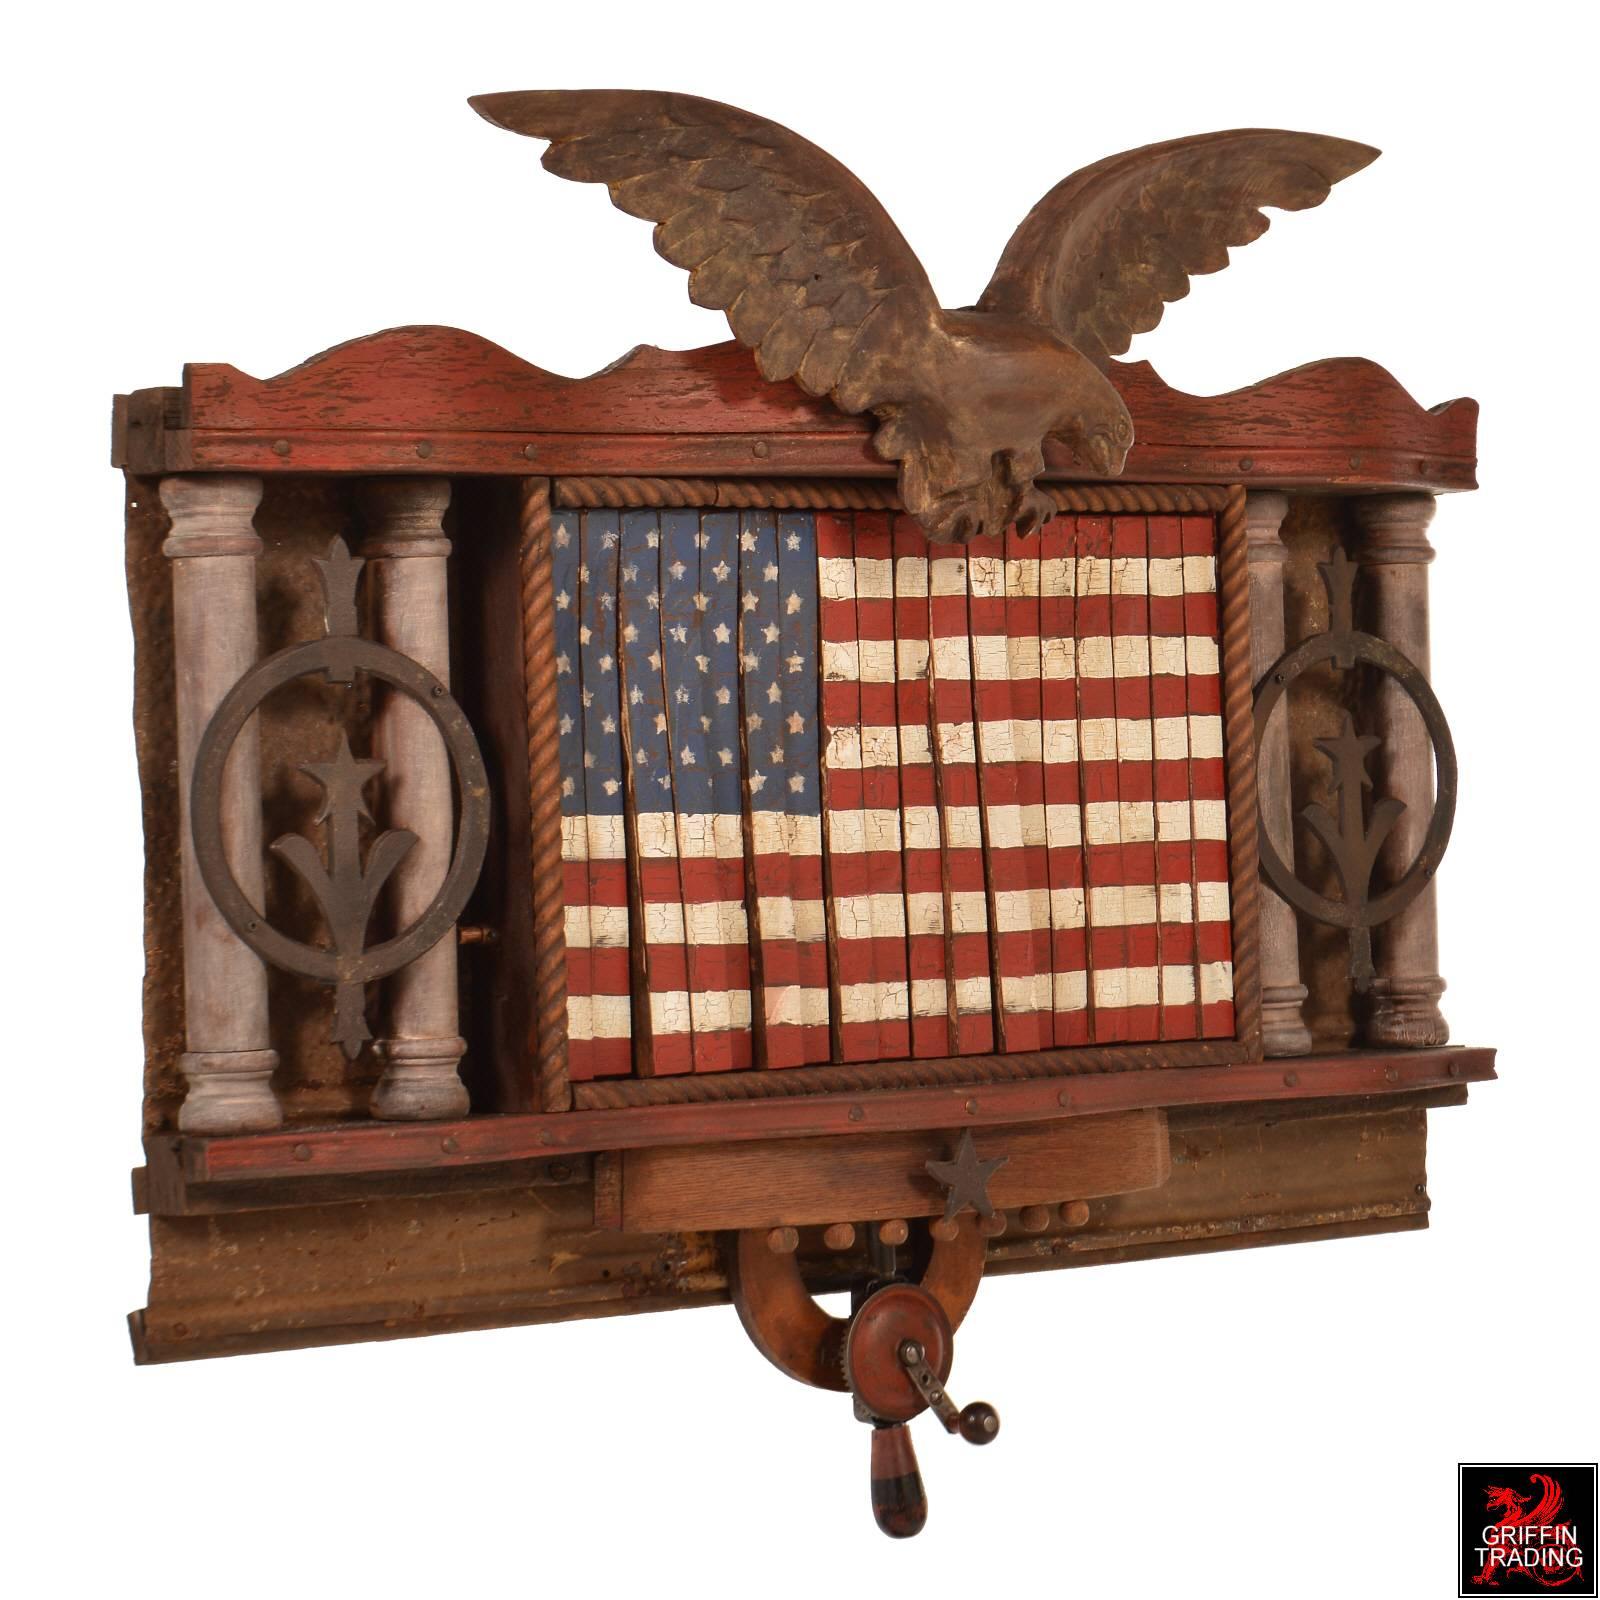 Standing guard over Old Glory, this hand-carved Eagle with 25″ wingspan is just one of the many components and features that make up this unique Folk Art wall hanging. The most amazing part of this one-of-a-kind artwork is its mechanical waving